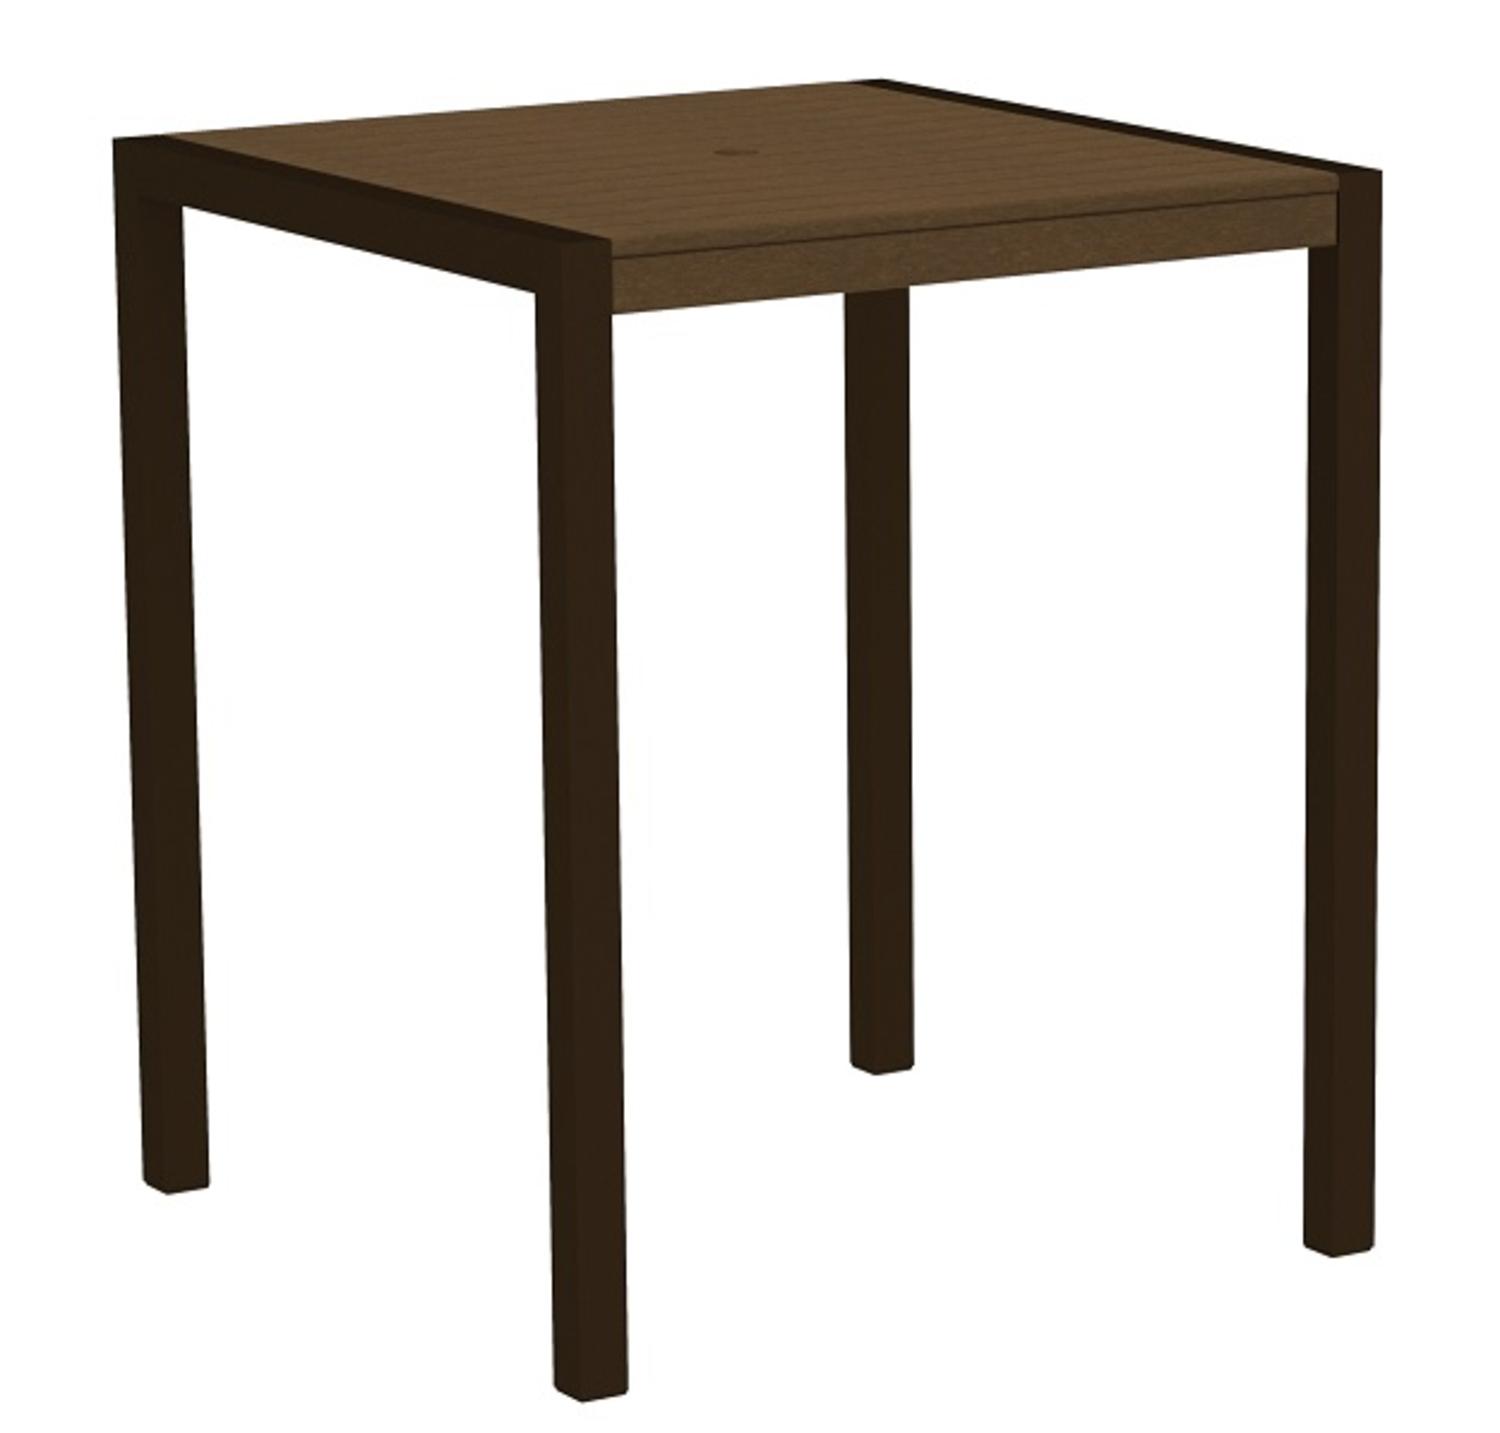 Eco-Friendly Furnishings 42" Outdoor Recycled Earth-Friendly Bar Table - Teak Brown with Bronze Frame